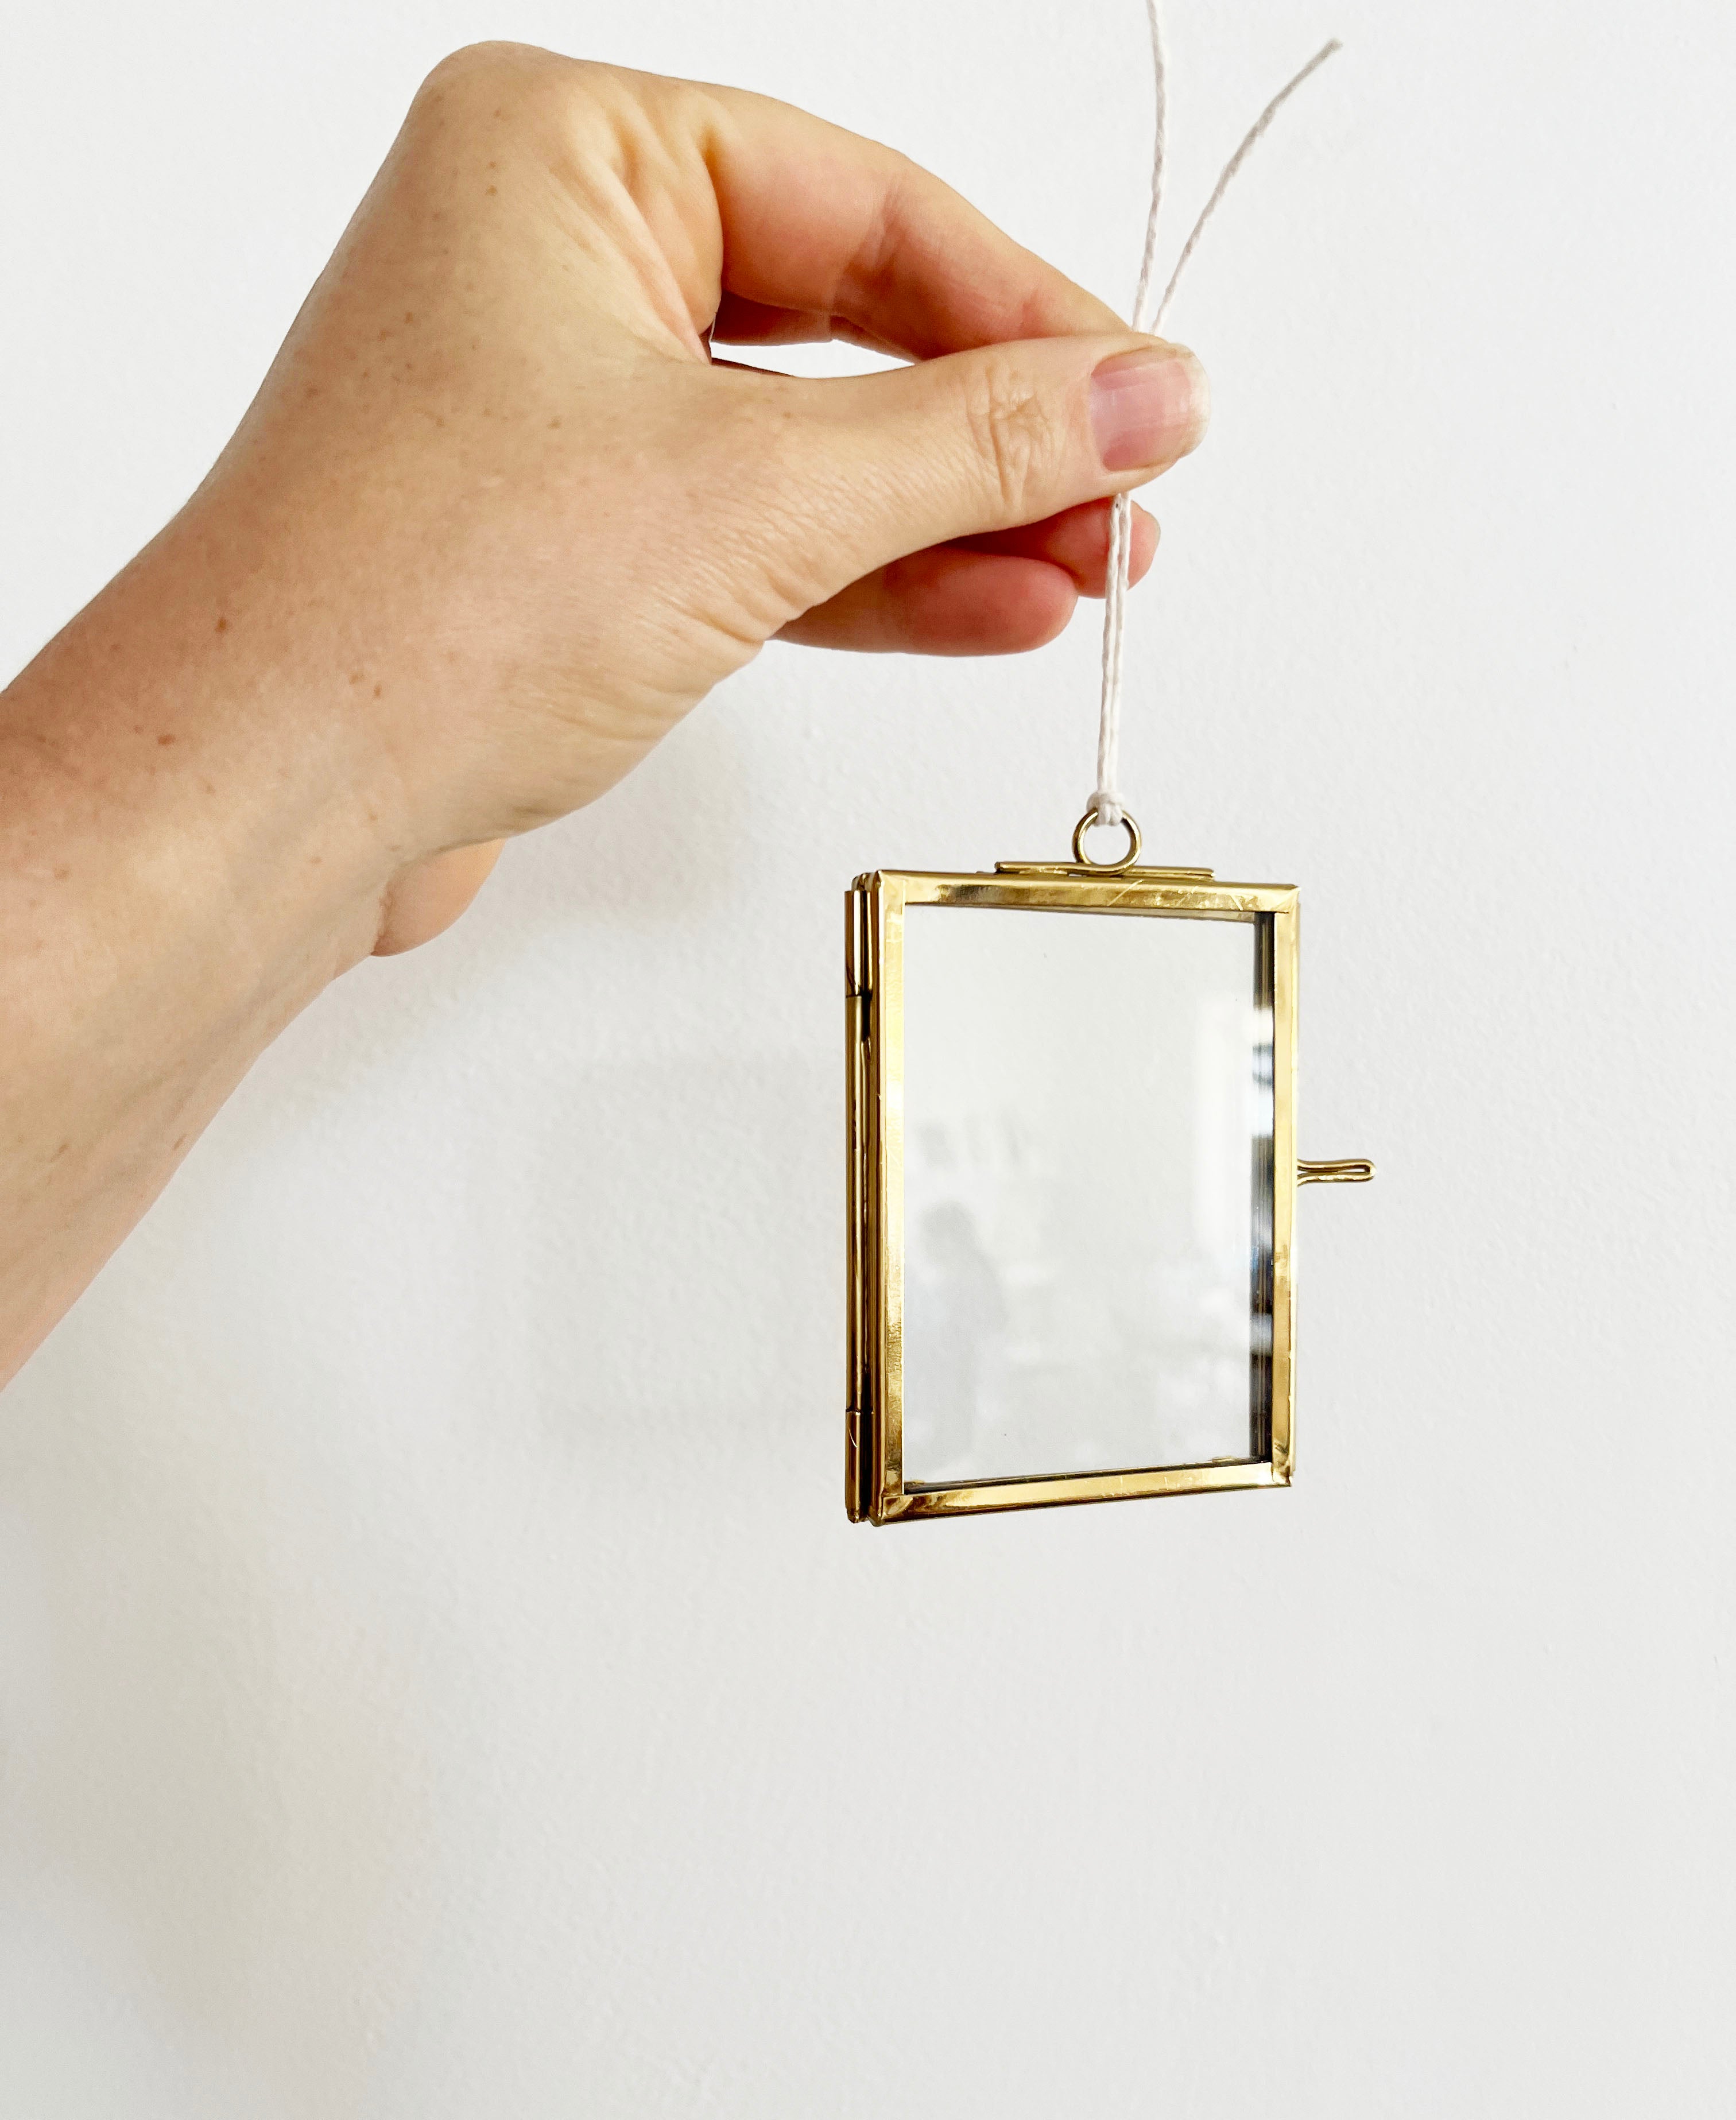 Glass Brass Hinged Frame - small